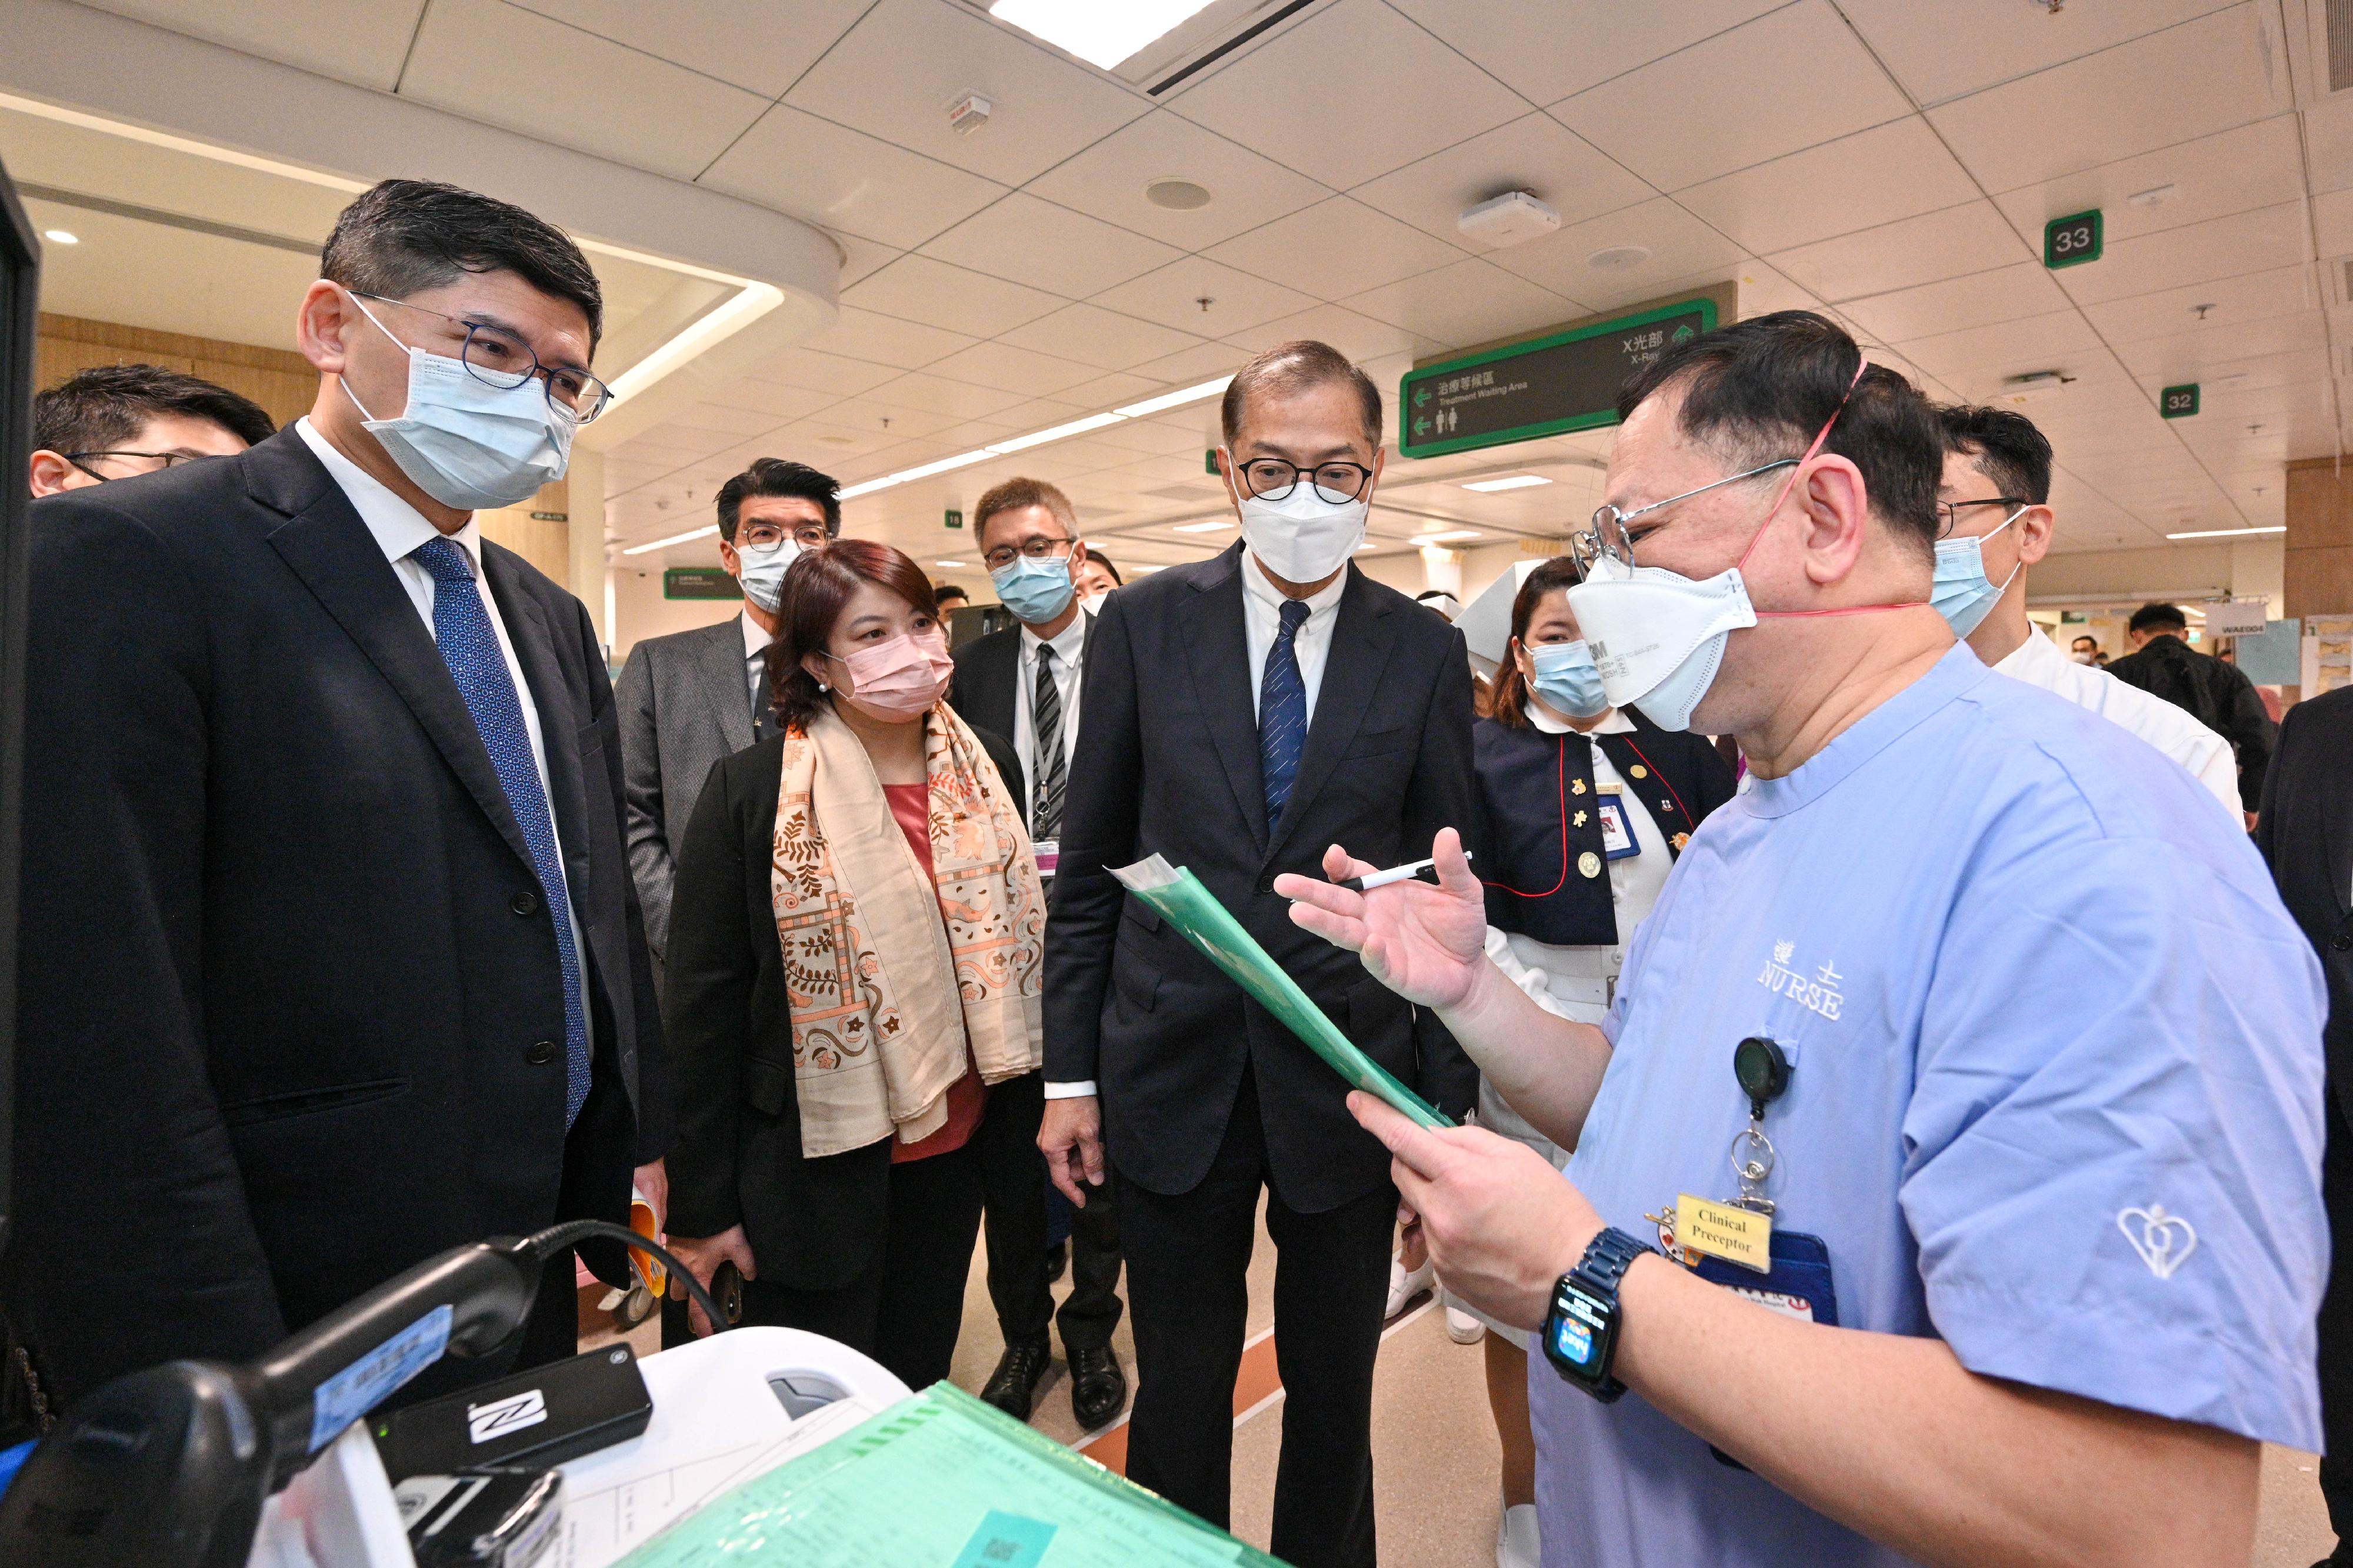 The Secretary for Health, Professor Lo Chung-mau (front row, second right), inspects the Accident and Emergency Department of Kwong Wah Hospital to know more about its triage arrangements this morning (February 6). Looking on are the Under Secretary for Health, Dr Libby Lee (front row, second left), and the Chief Executive of the Hospital Authority, Dr Tony Ko (front row, first left).